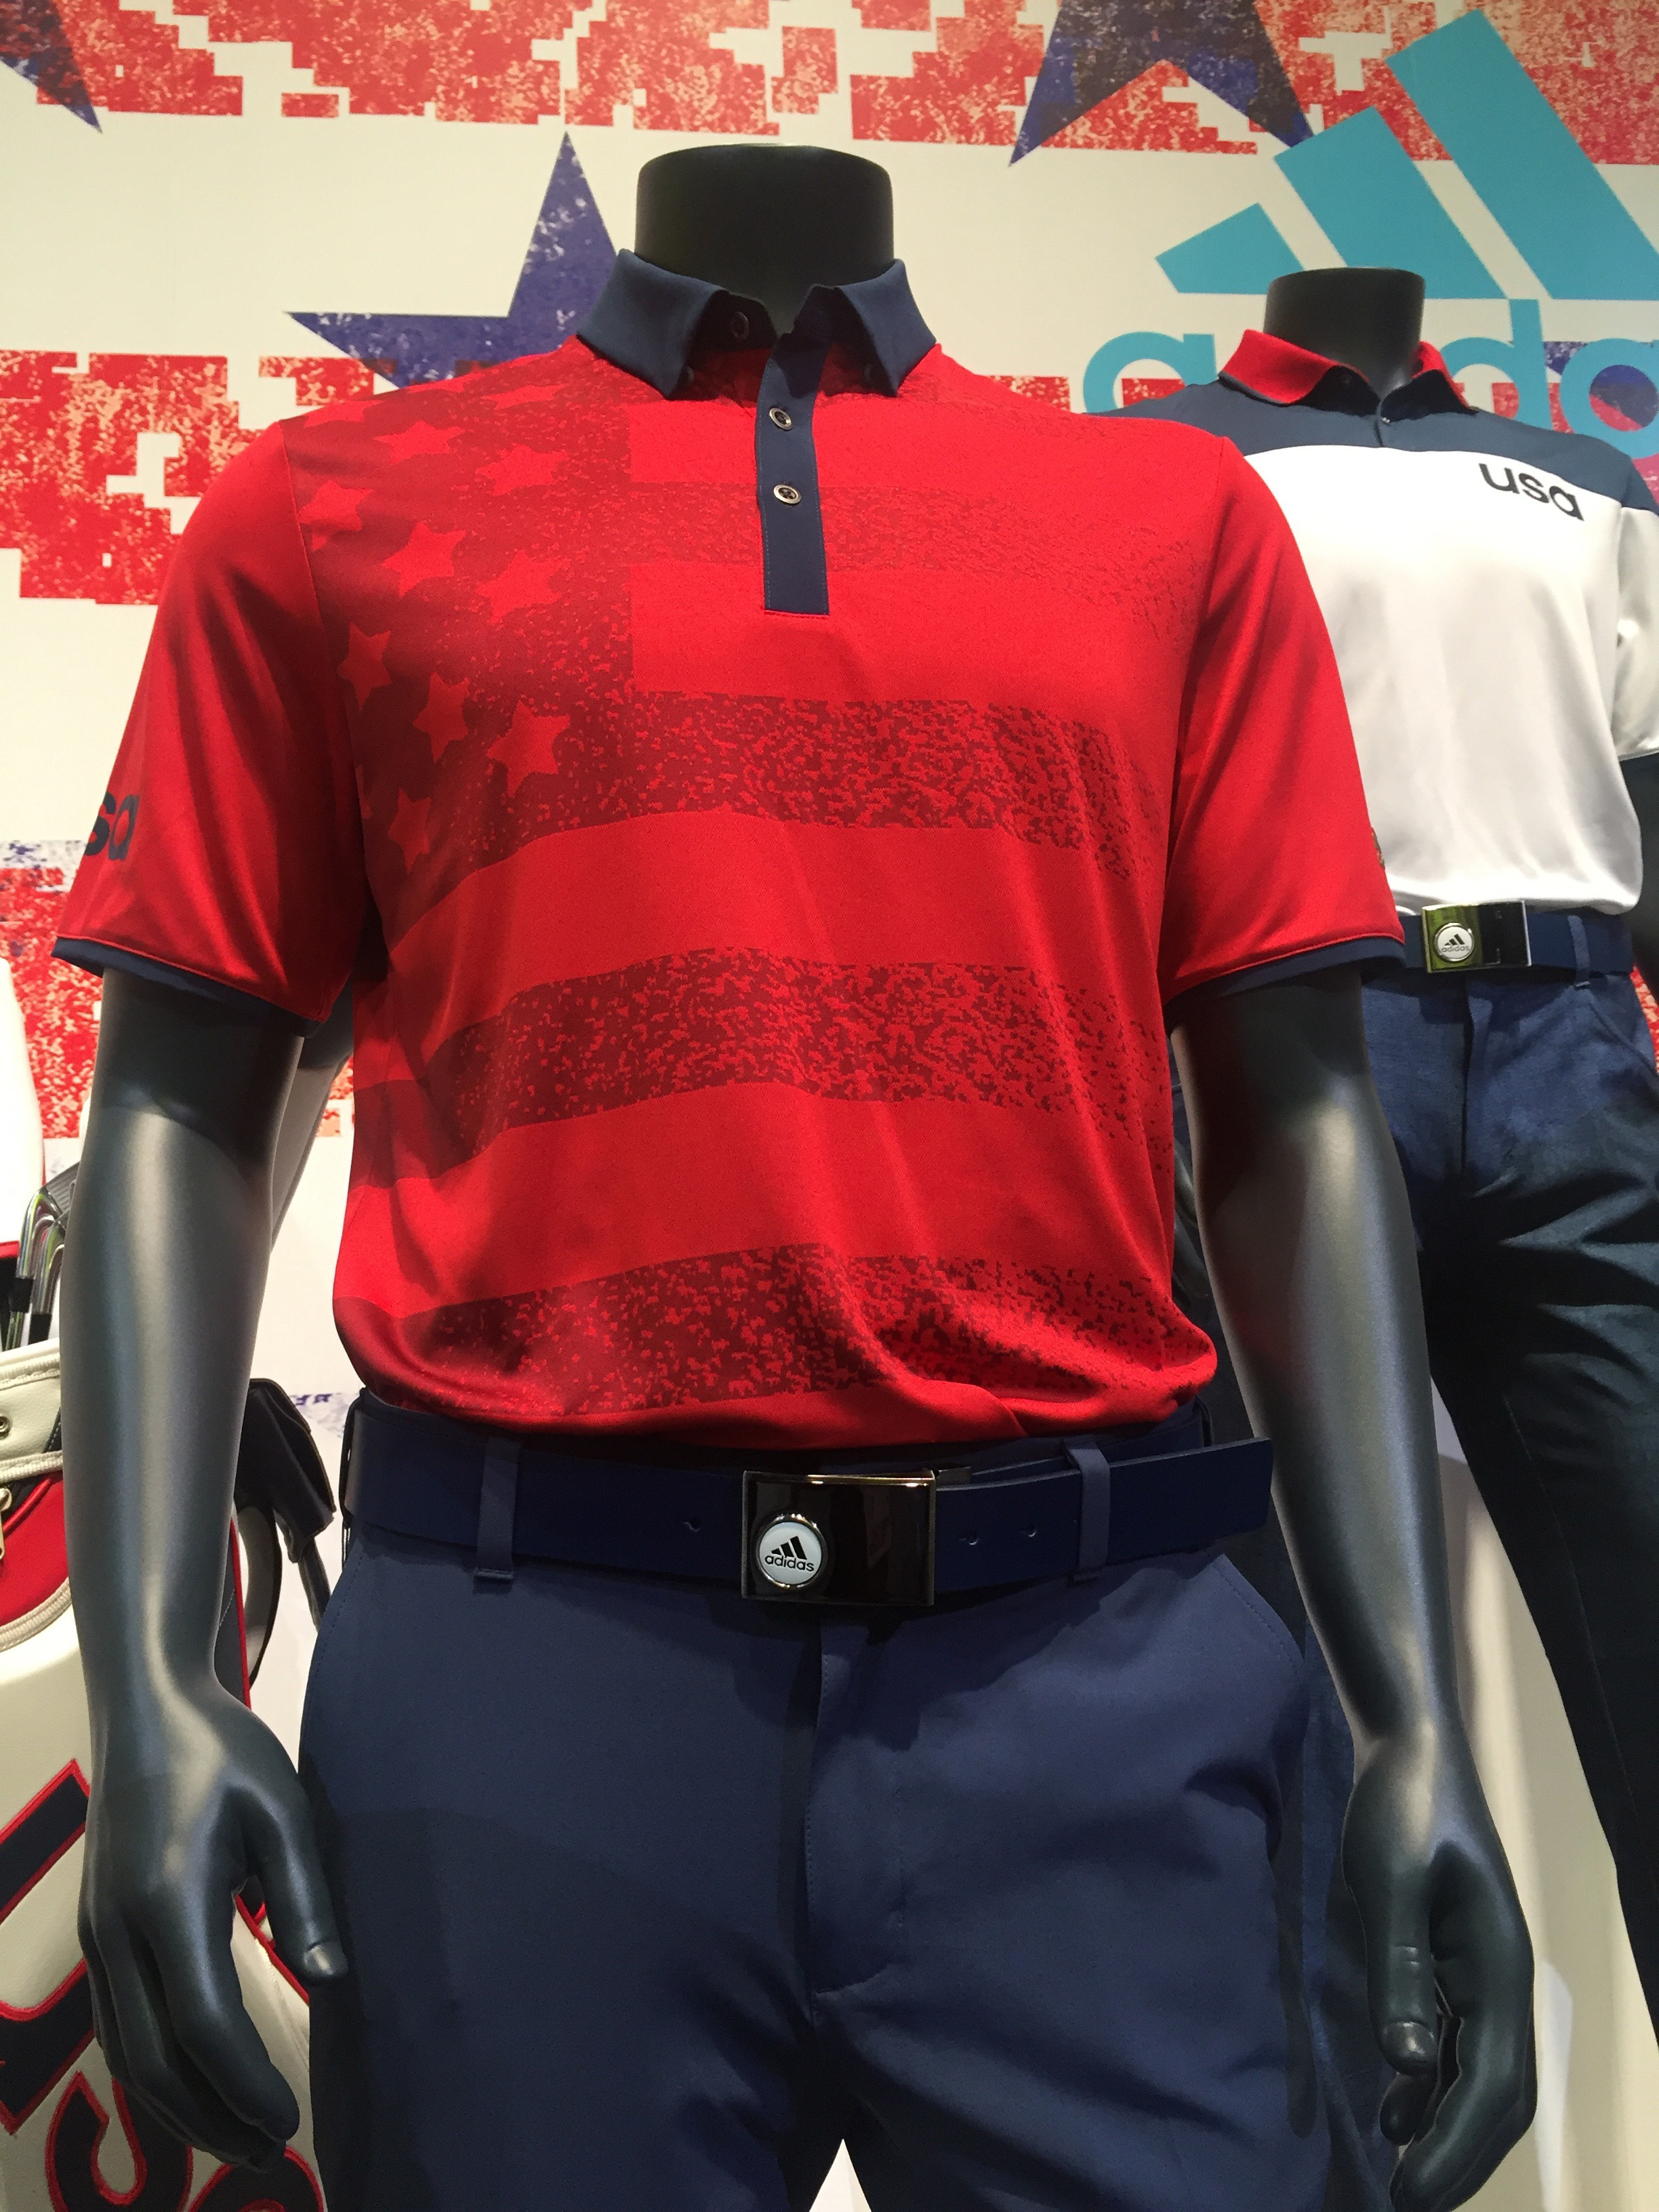 Adidas Golf unveils the Olympic apparel to be worn by U.S. golfers this summer in Rio This is the | Golf Digest